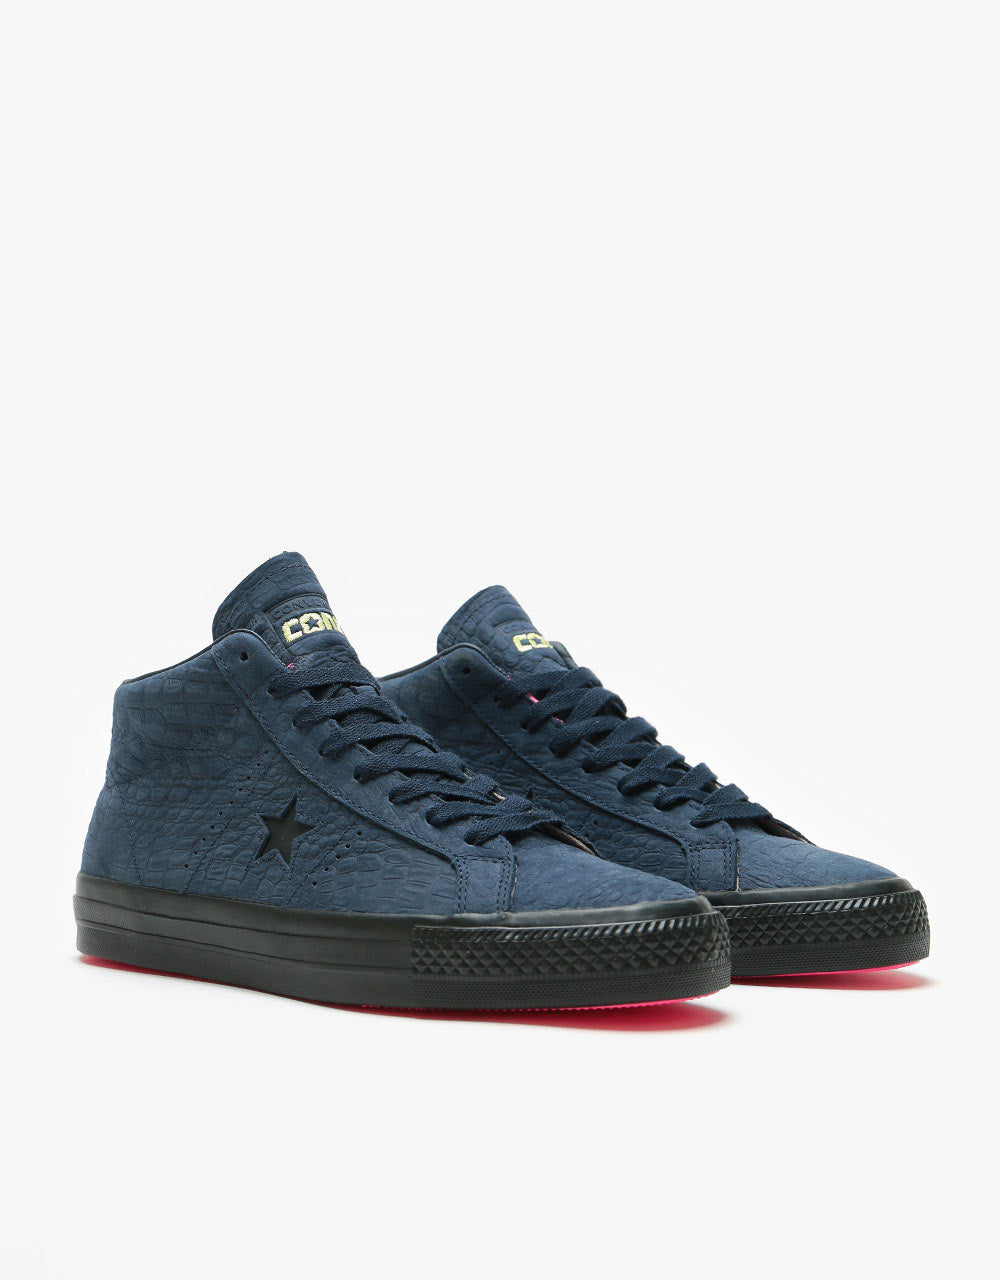 Converse One Star Pro Mid Skate Shoes - Obsidian/Hyper Pink/Black – Route  One